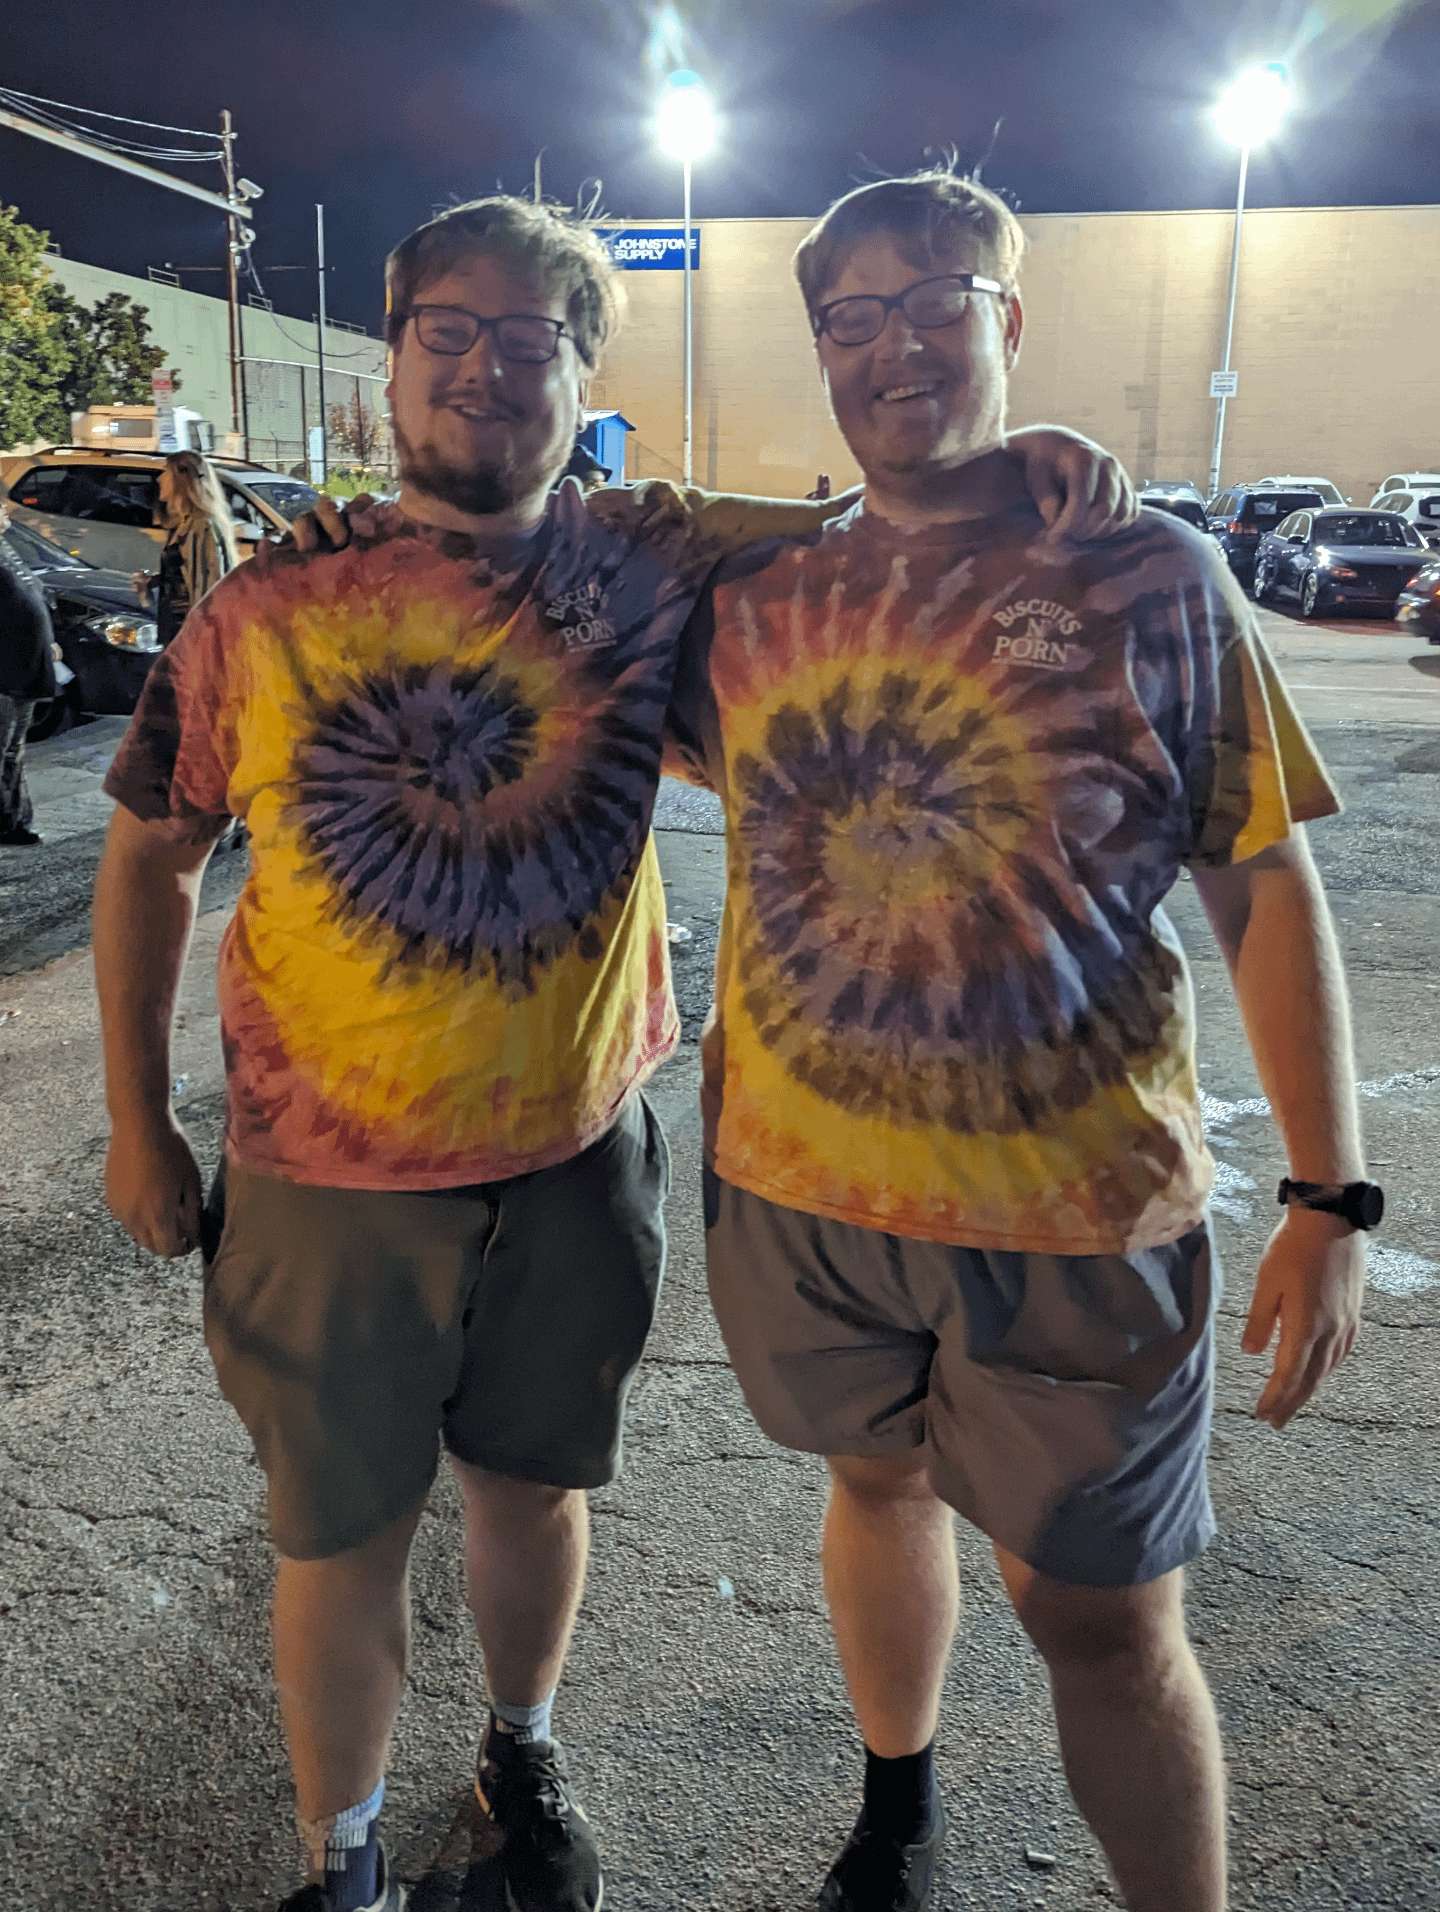 image showing Met my doppelganger at a concert last night